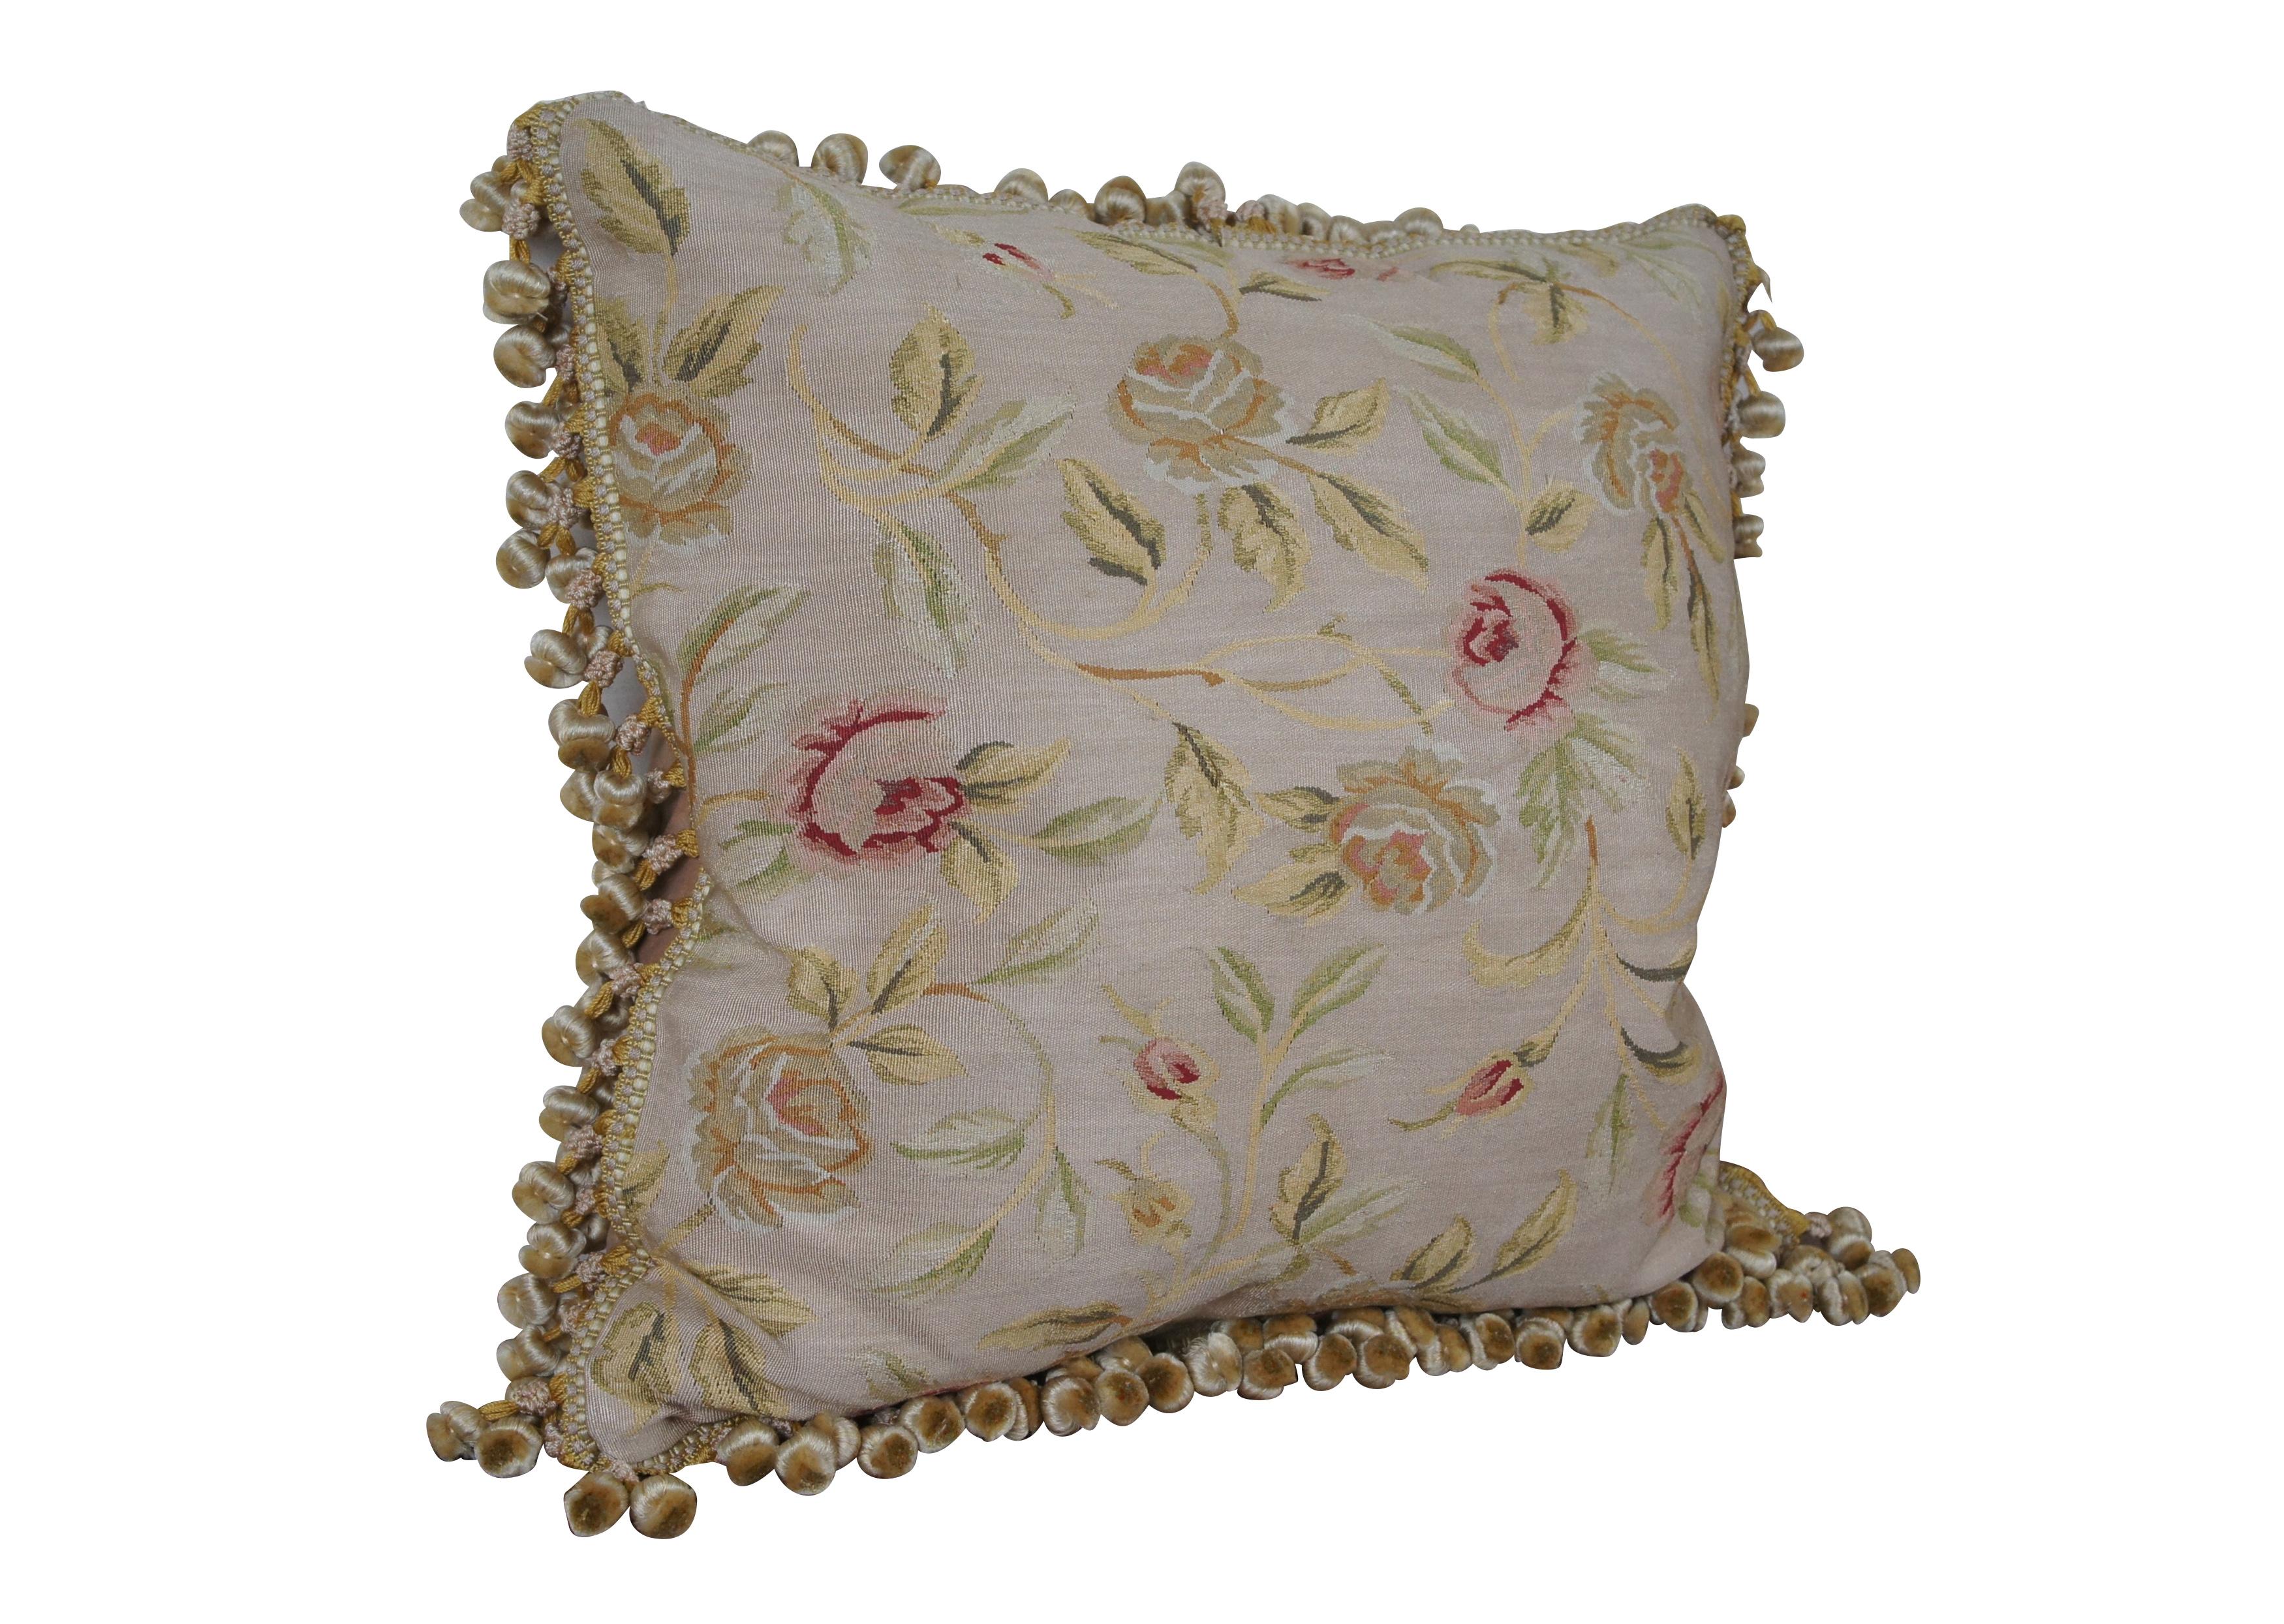 20th century square throw pillow, embroidered in silk with leafy stems of large yellow and pink roses. Cream and gold ball tassel trim. Light brown velour back with zipper closure. Down filled.

Dimensions:
22